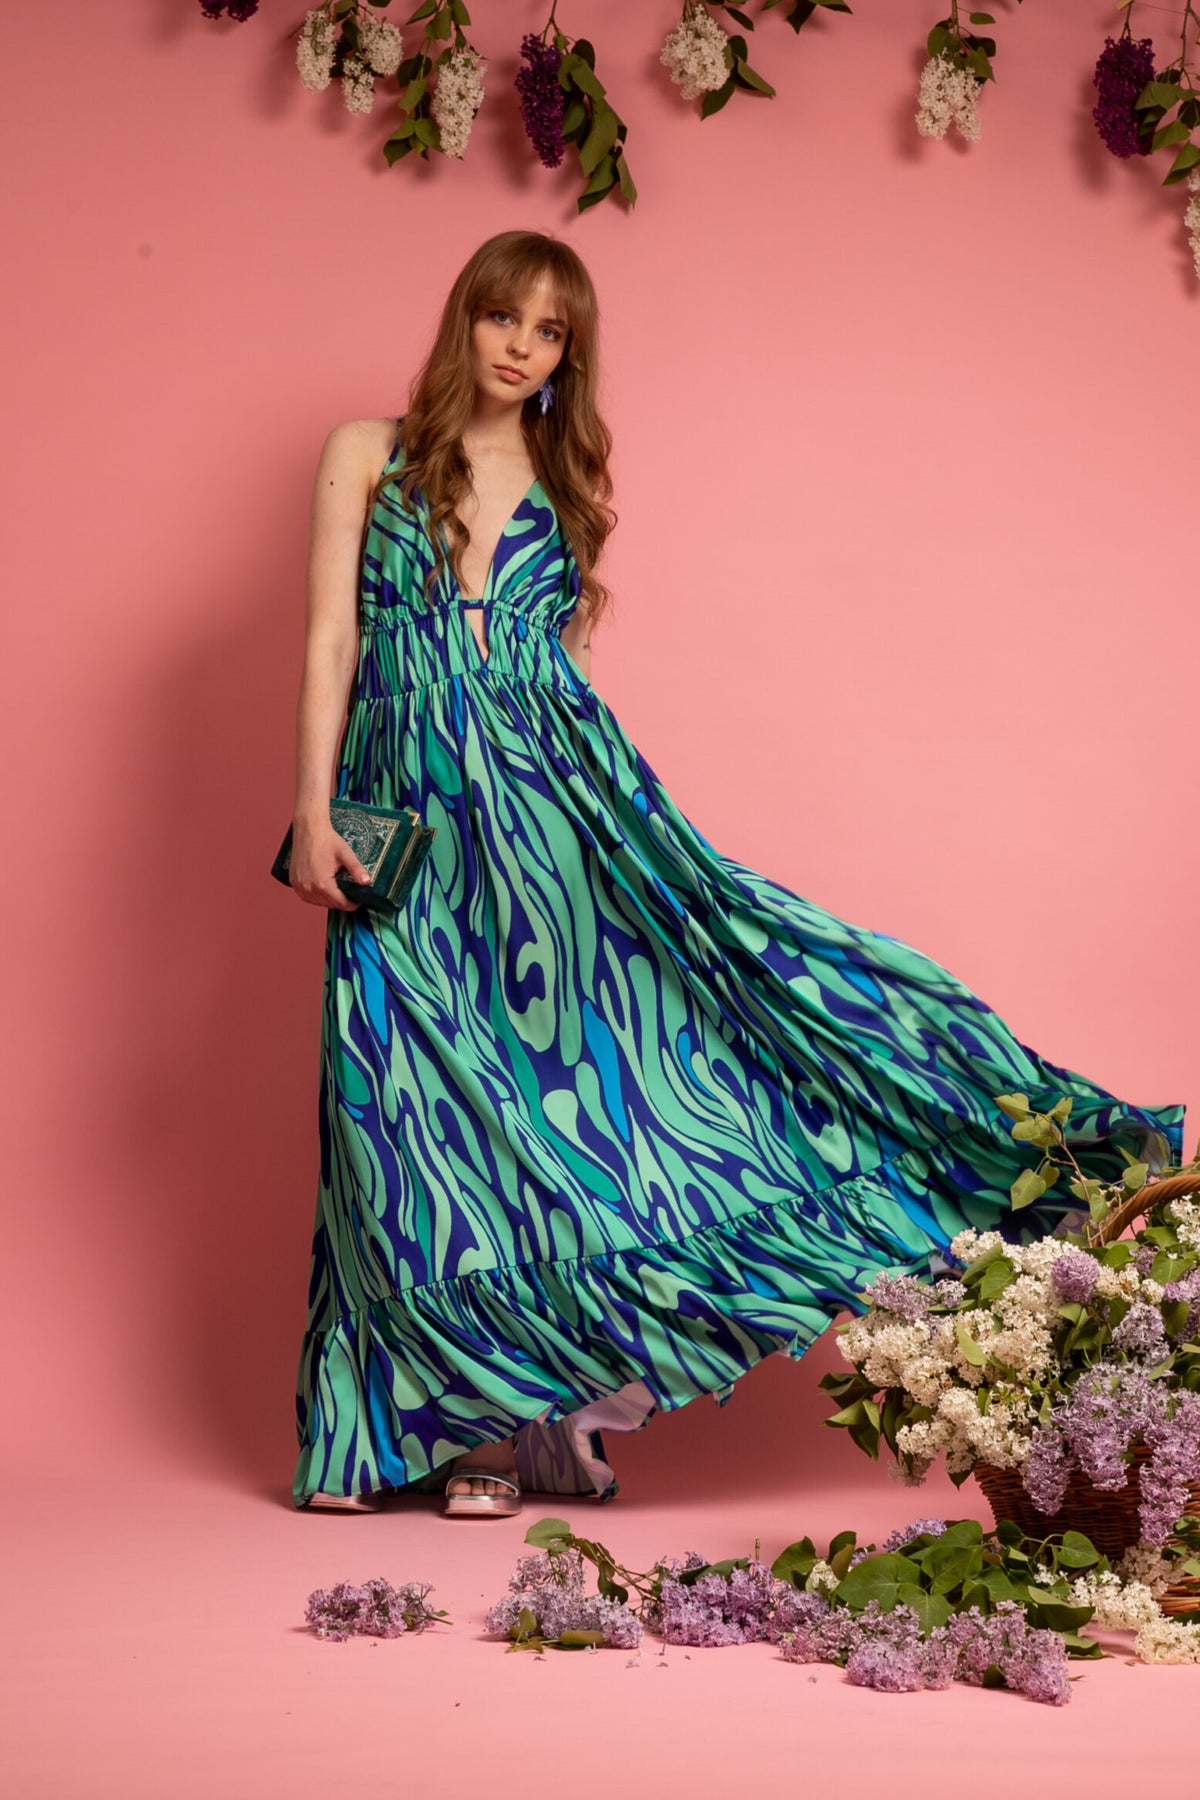 Mermaid maxi dress in green and blue